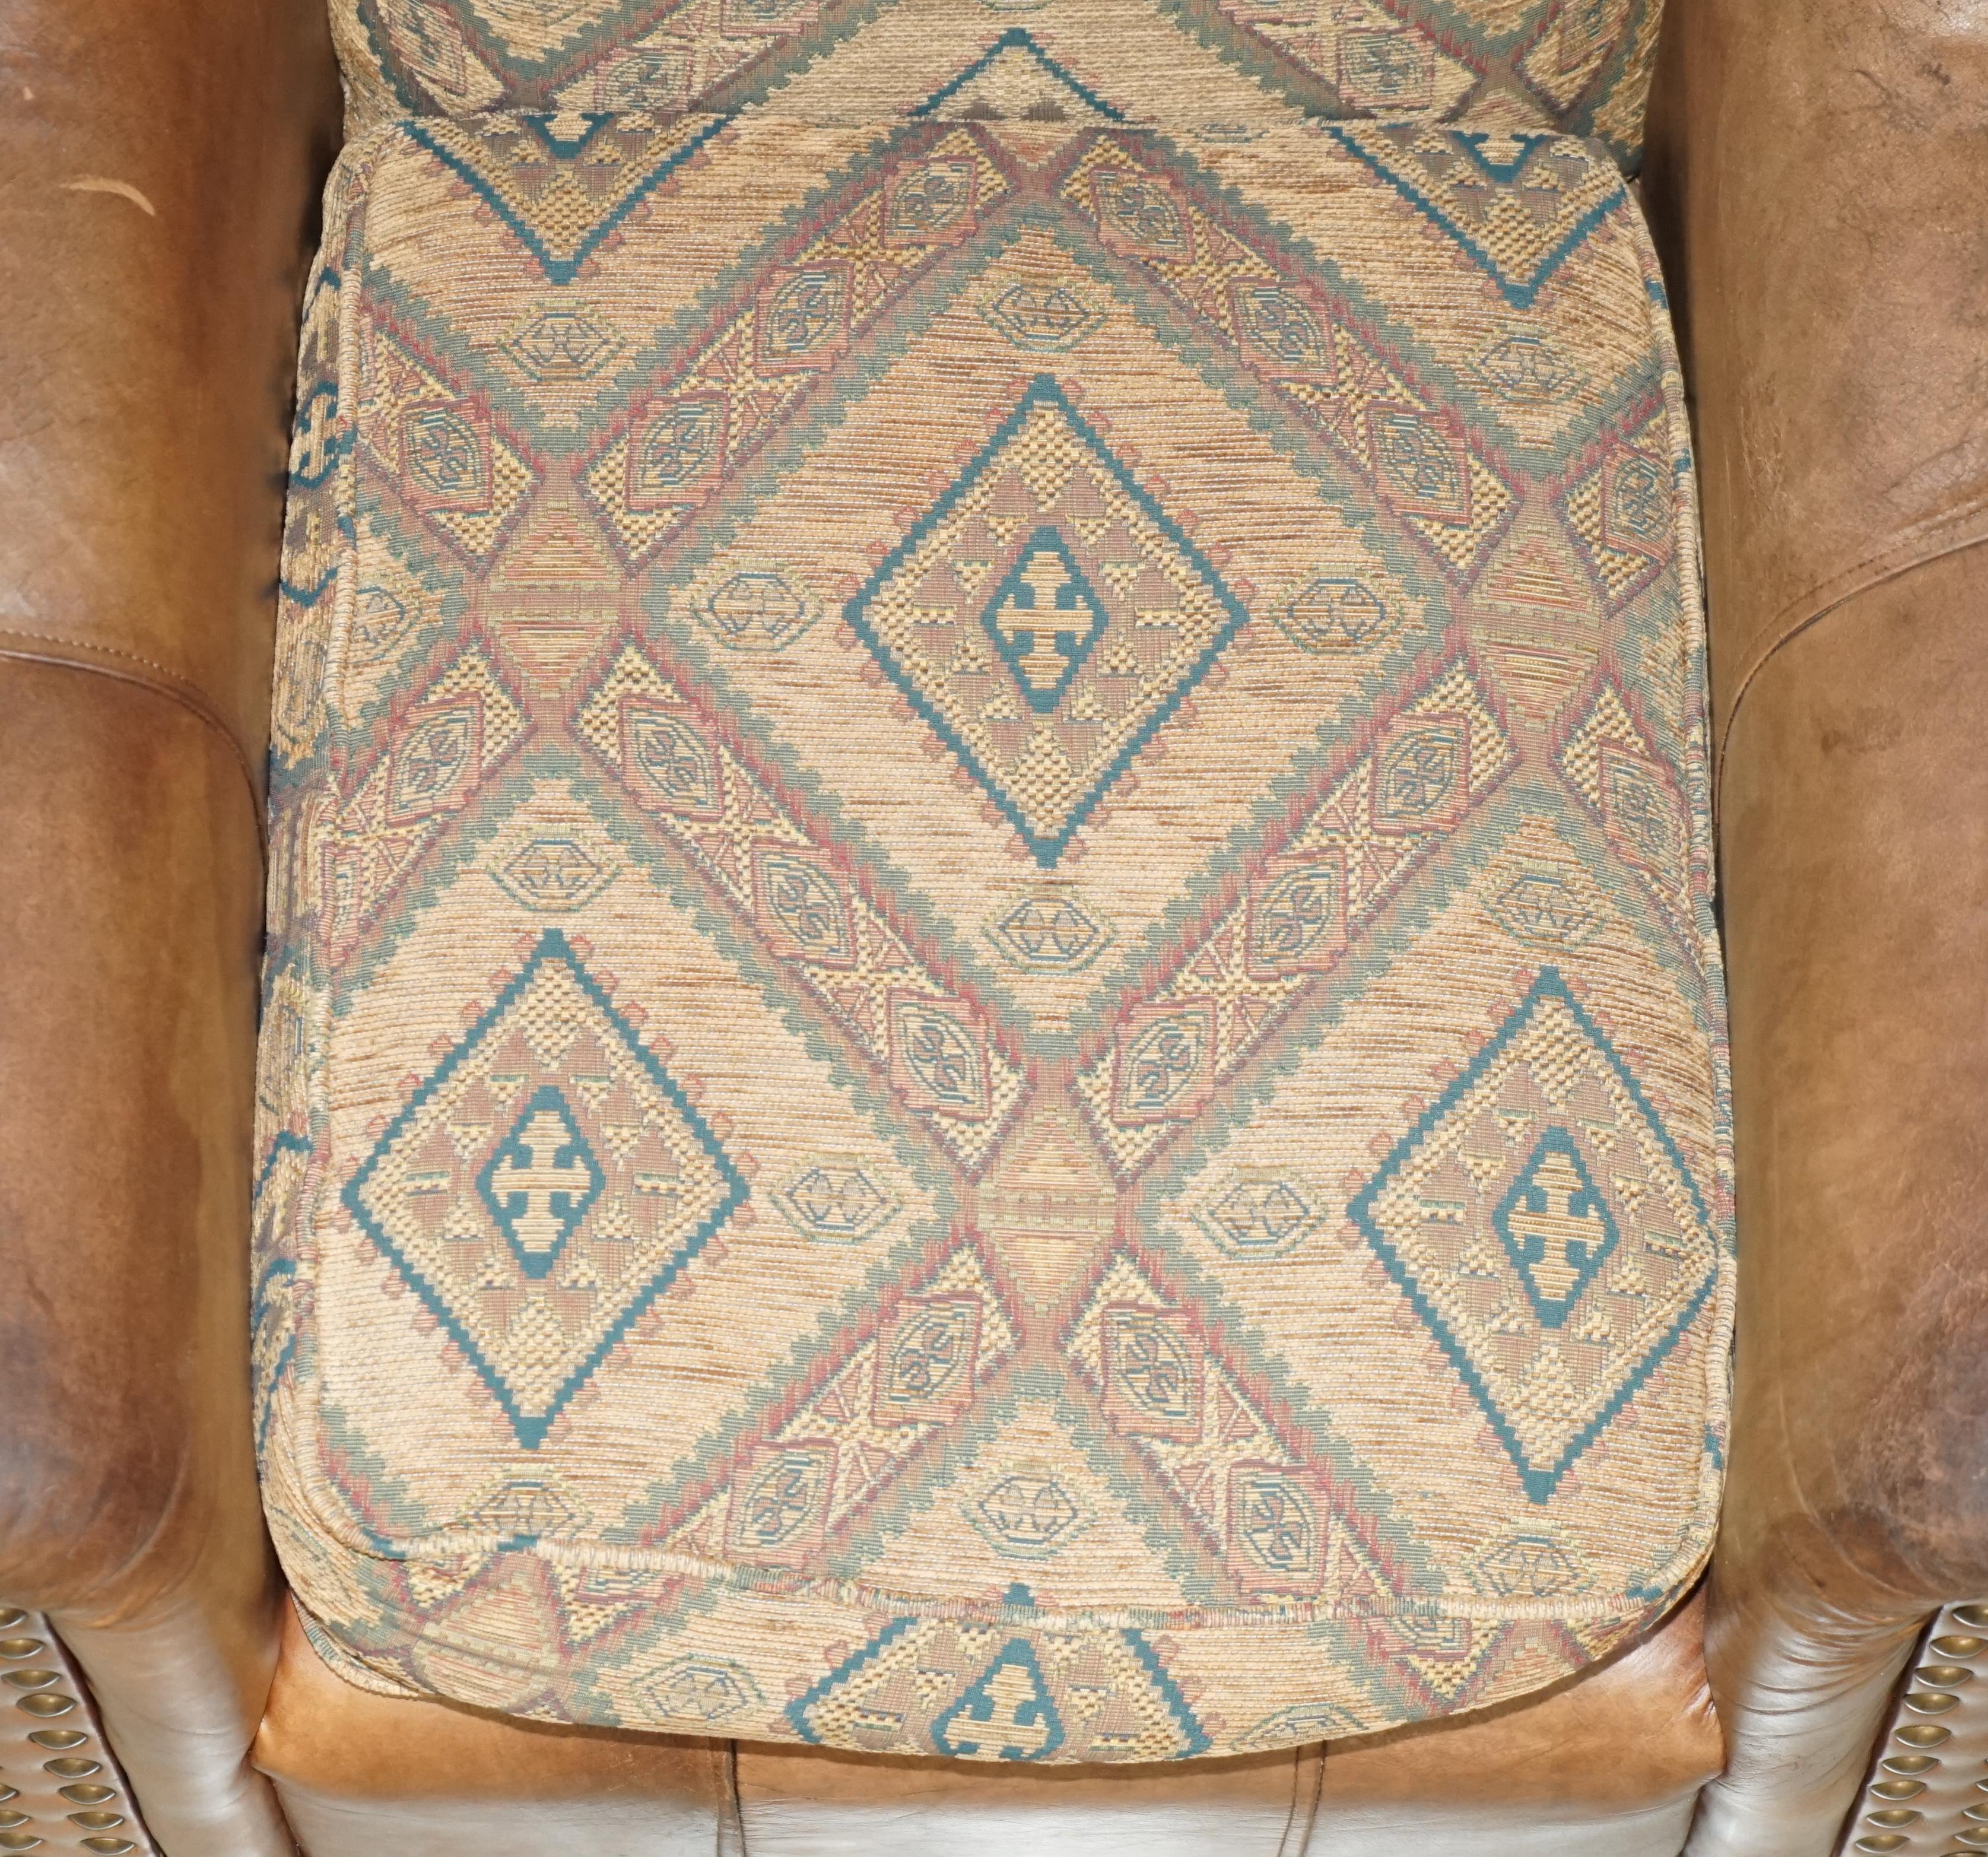 PAIR OF ViNTAGE THOMAS LLOYD BROWN LEATHER KILIM ARMCHAIRS FROM SCOTTISH CASTLe 5